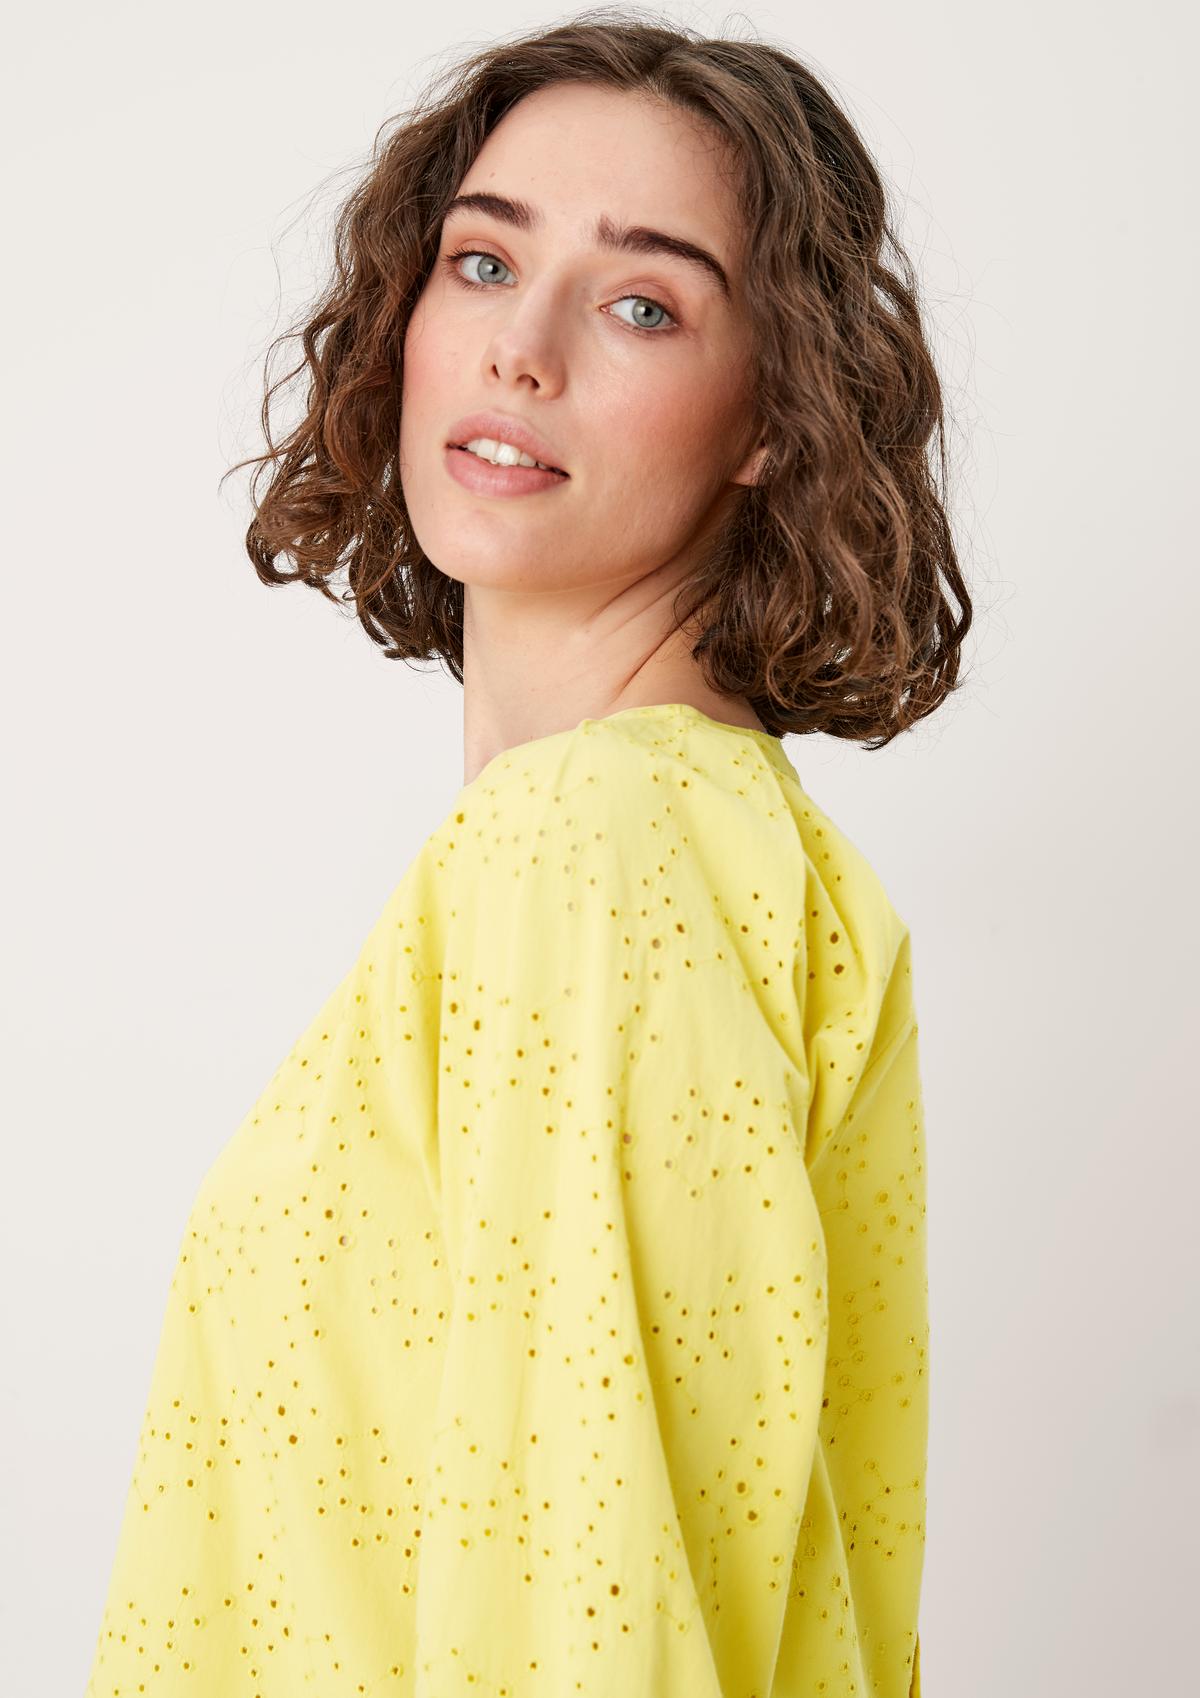 s.Oliver Bluse mit Broderie Anglaise